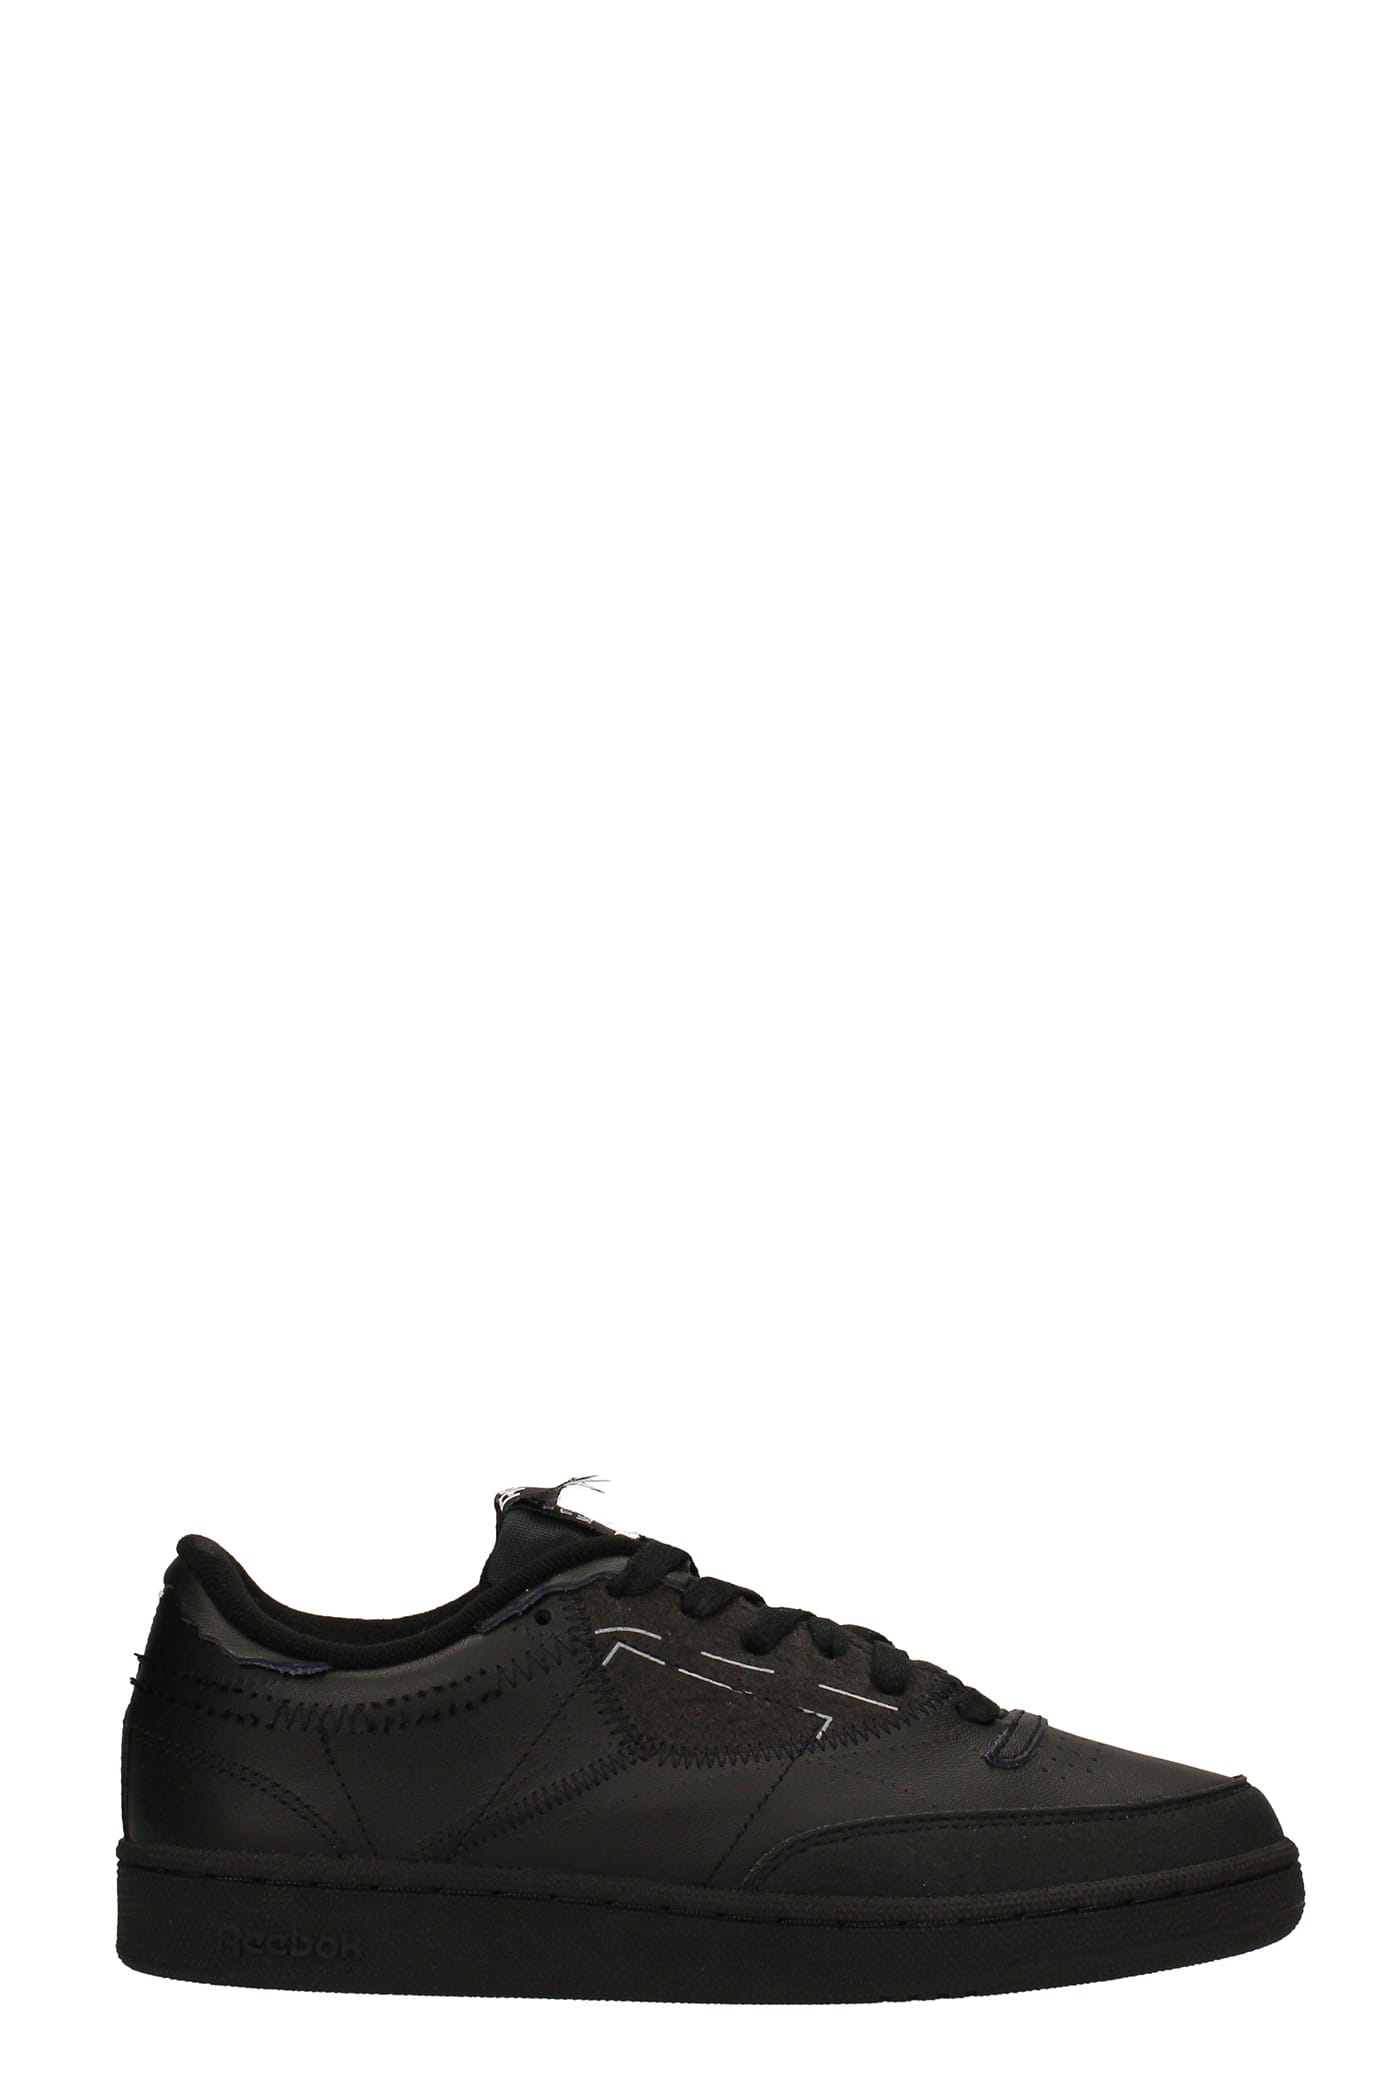 Maison Margiela Sneakers In Black Suede And Leather